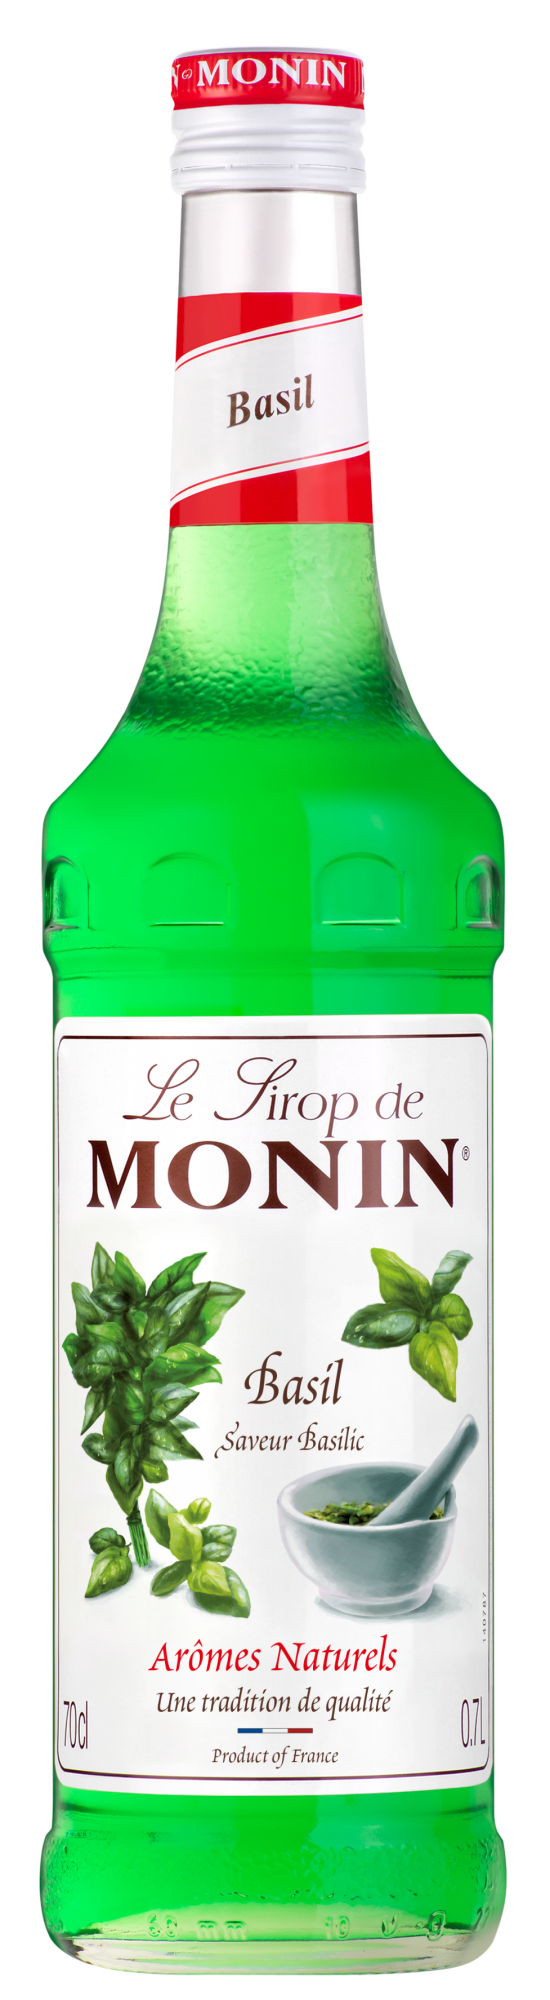 Buy MONIN Basil Syrup. It captures the fragrant, aromatic and peppery notes associated with fresh basil.